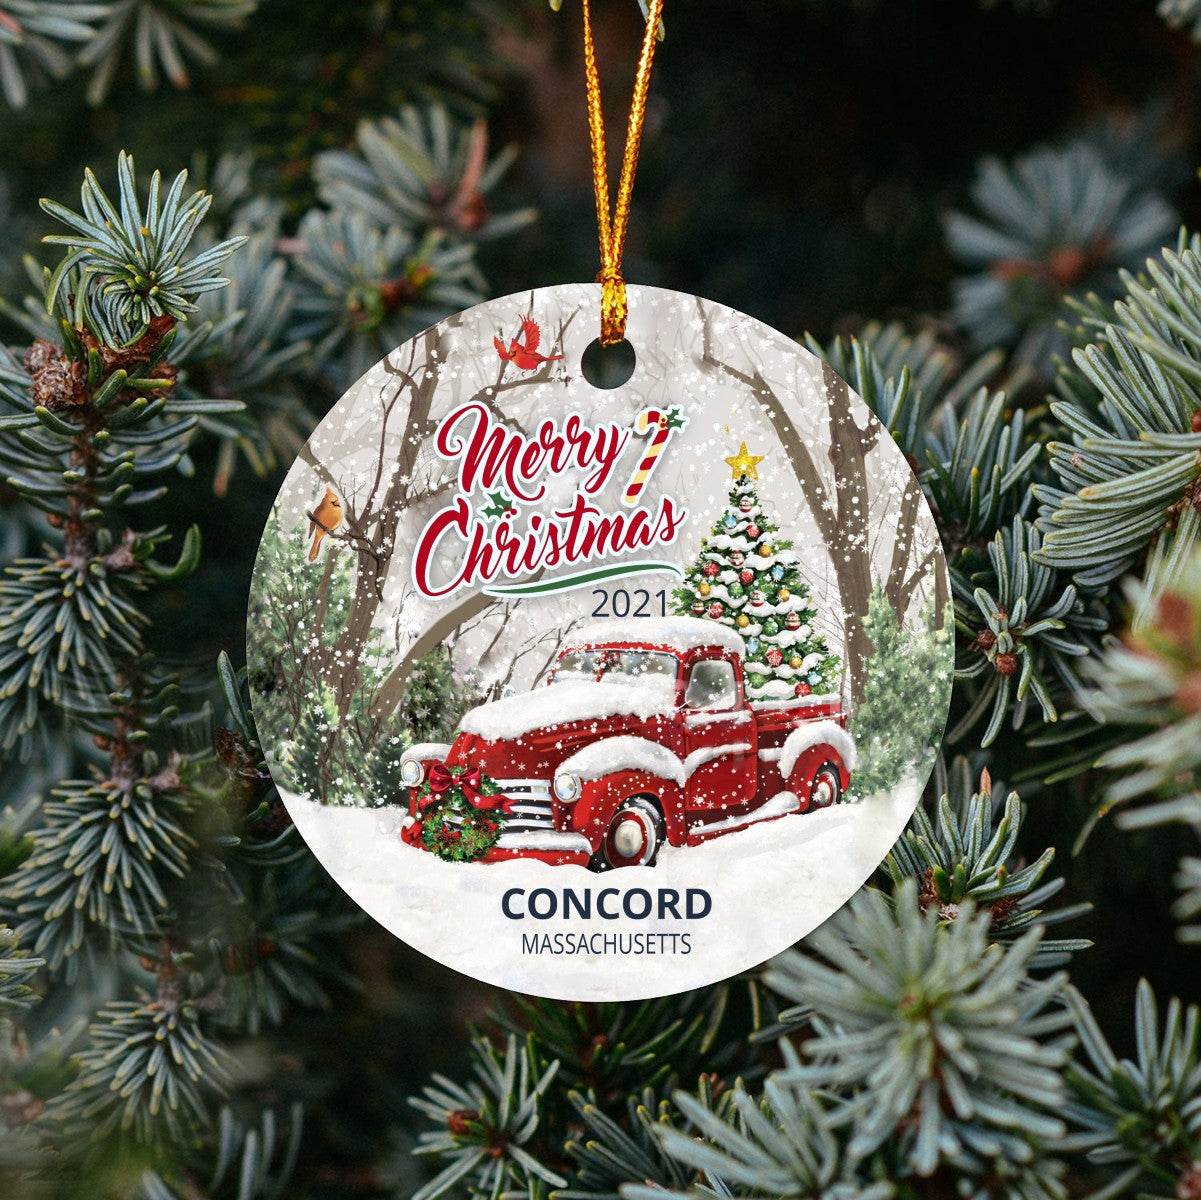 Christmas Tree Ornaments Concord - Ornament Customize With Name City And State Concord Massachusetts MA - Red Truck Xmas Ornaments 3'' Plastic Gift For Family, Friend And Housewarming